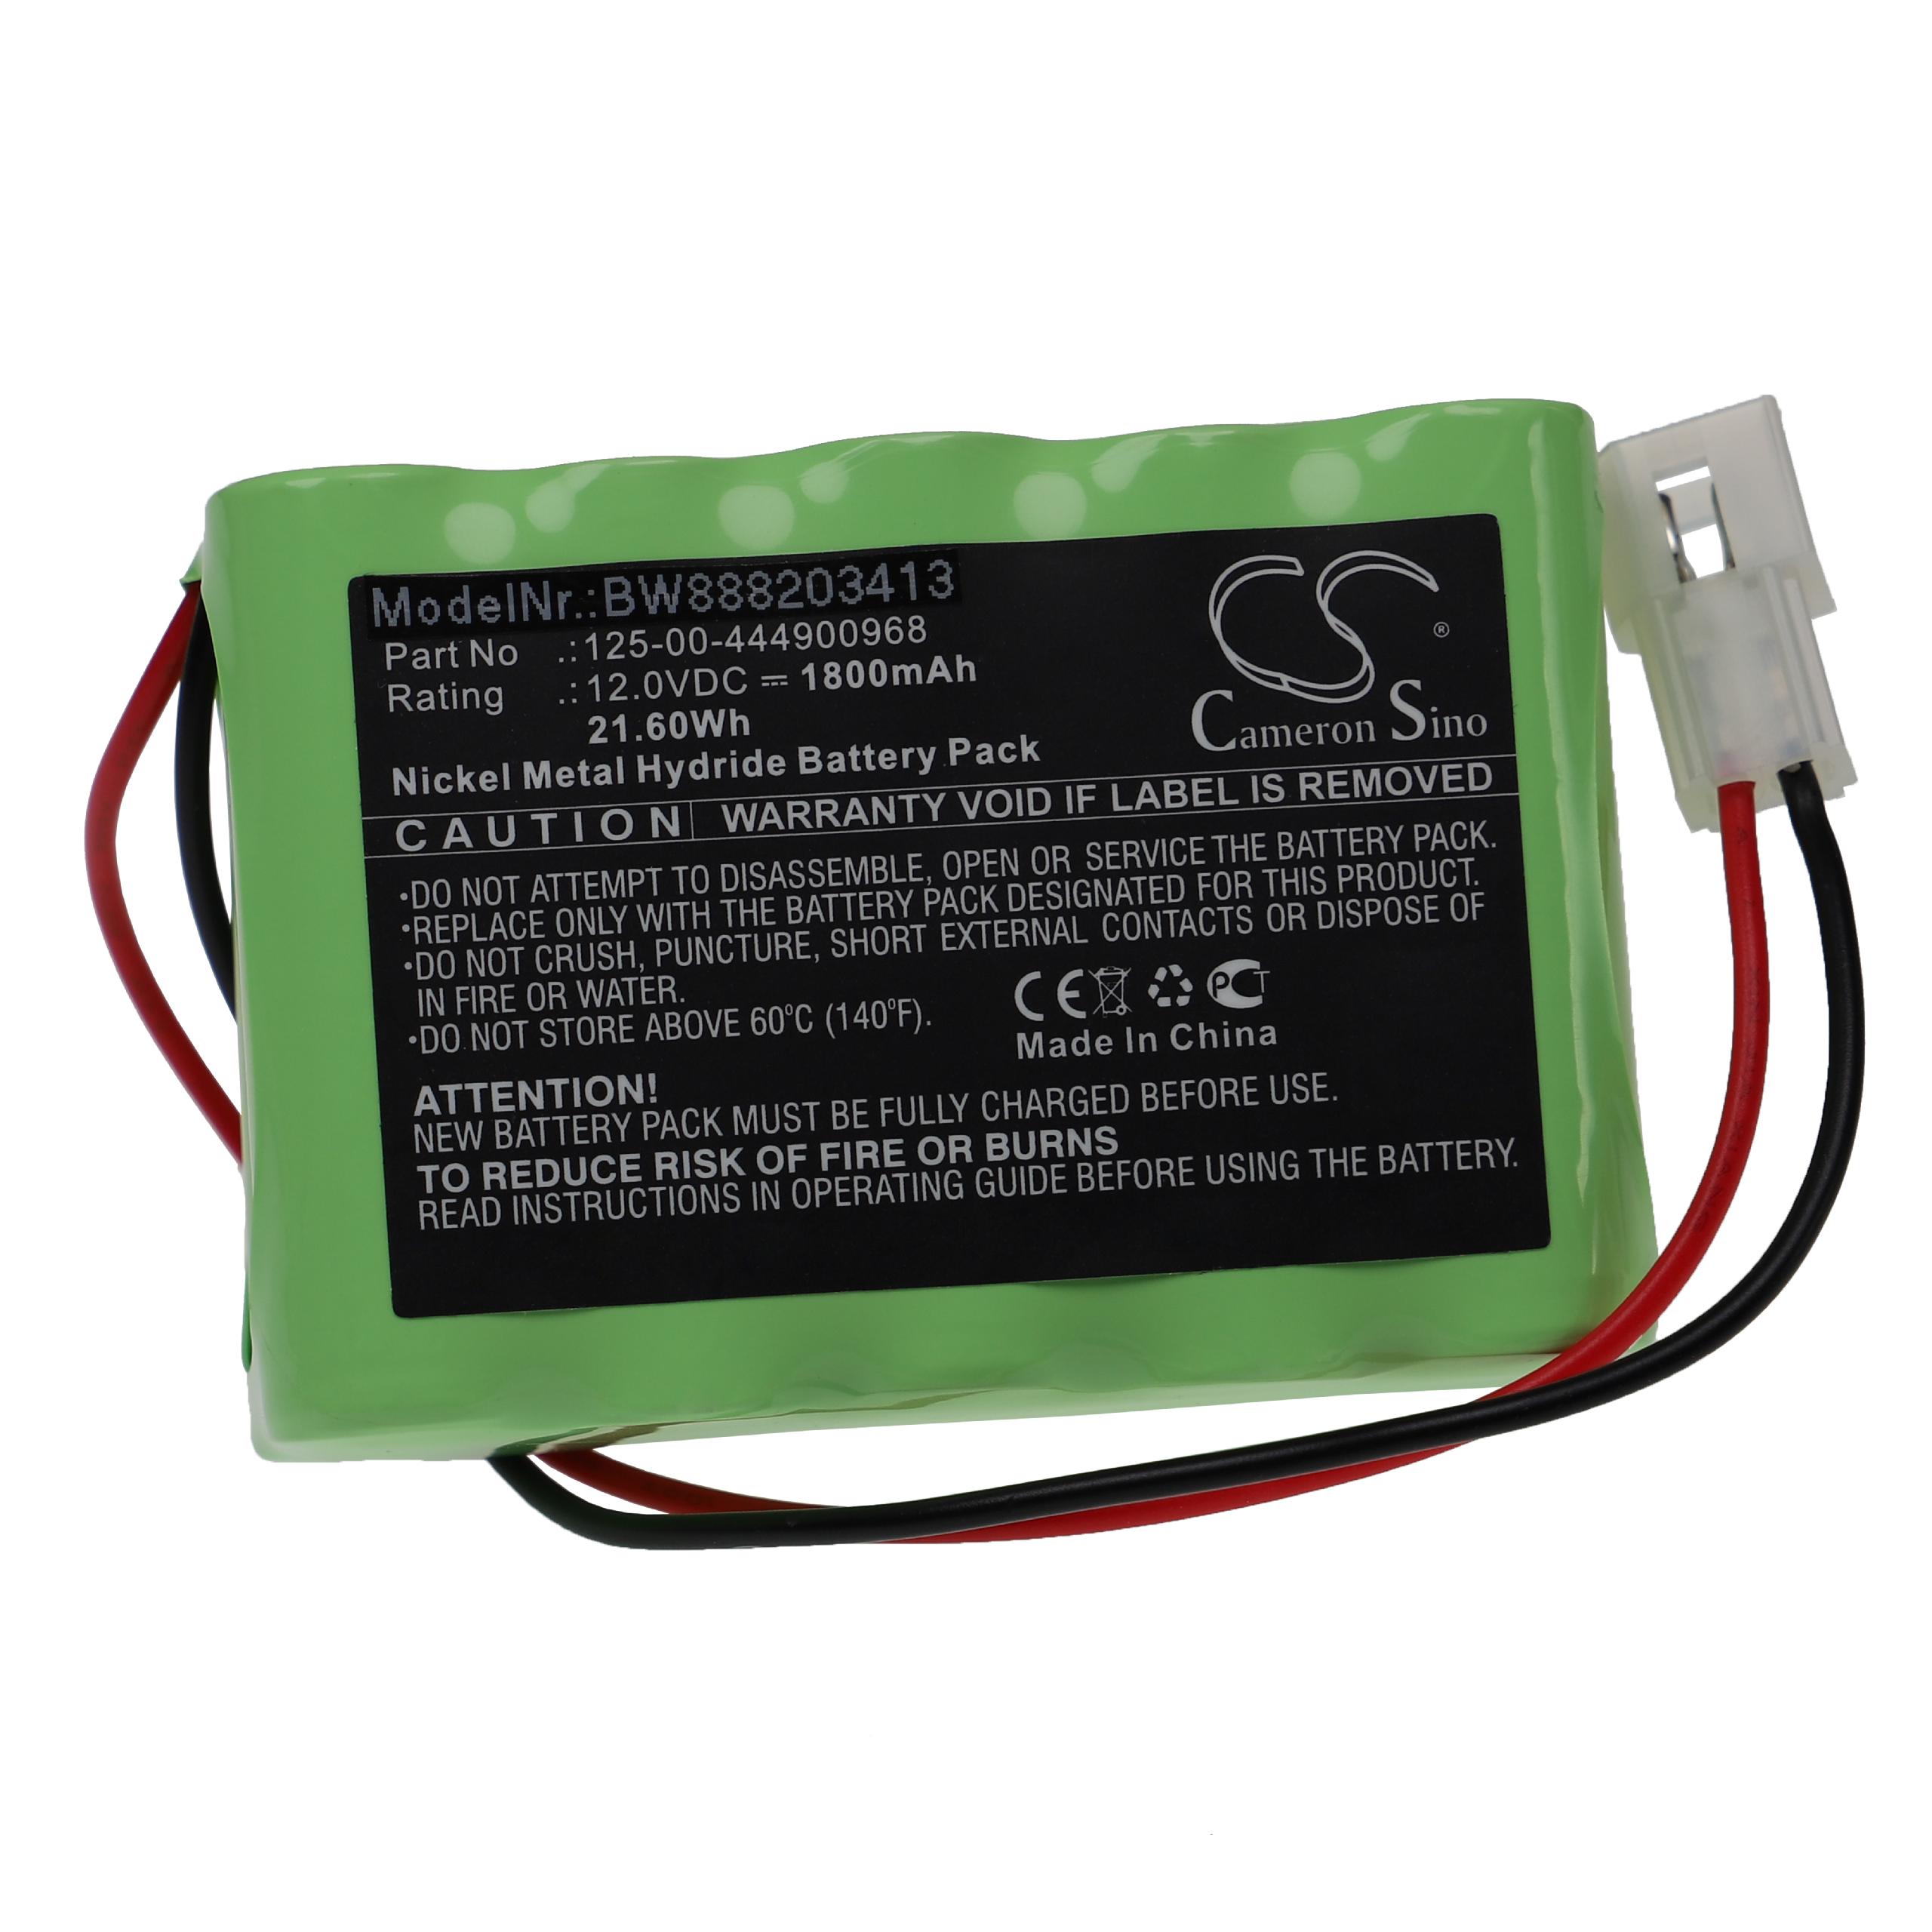 Medical Equipment Battery Replacement for Alaris Medicalsystems 125-00-444900968 - 1800mAh 12V NiMH